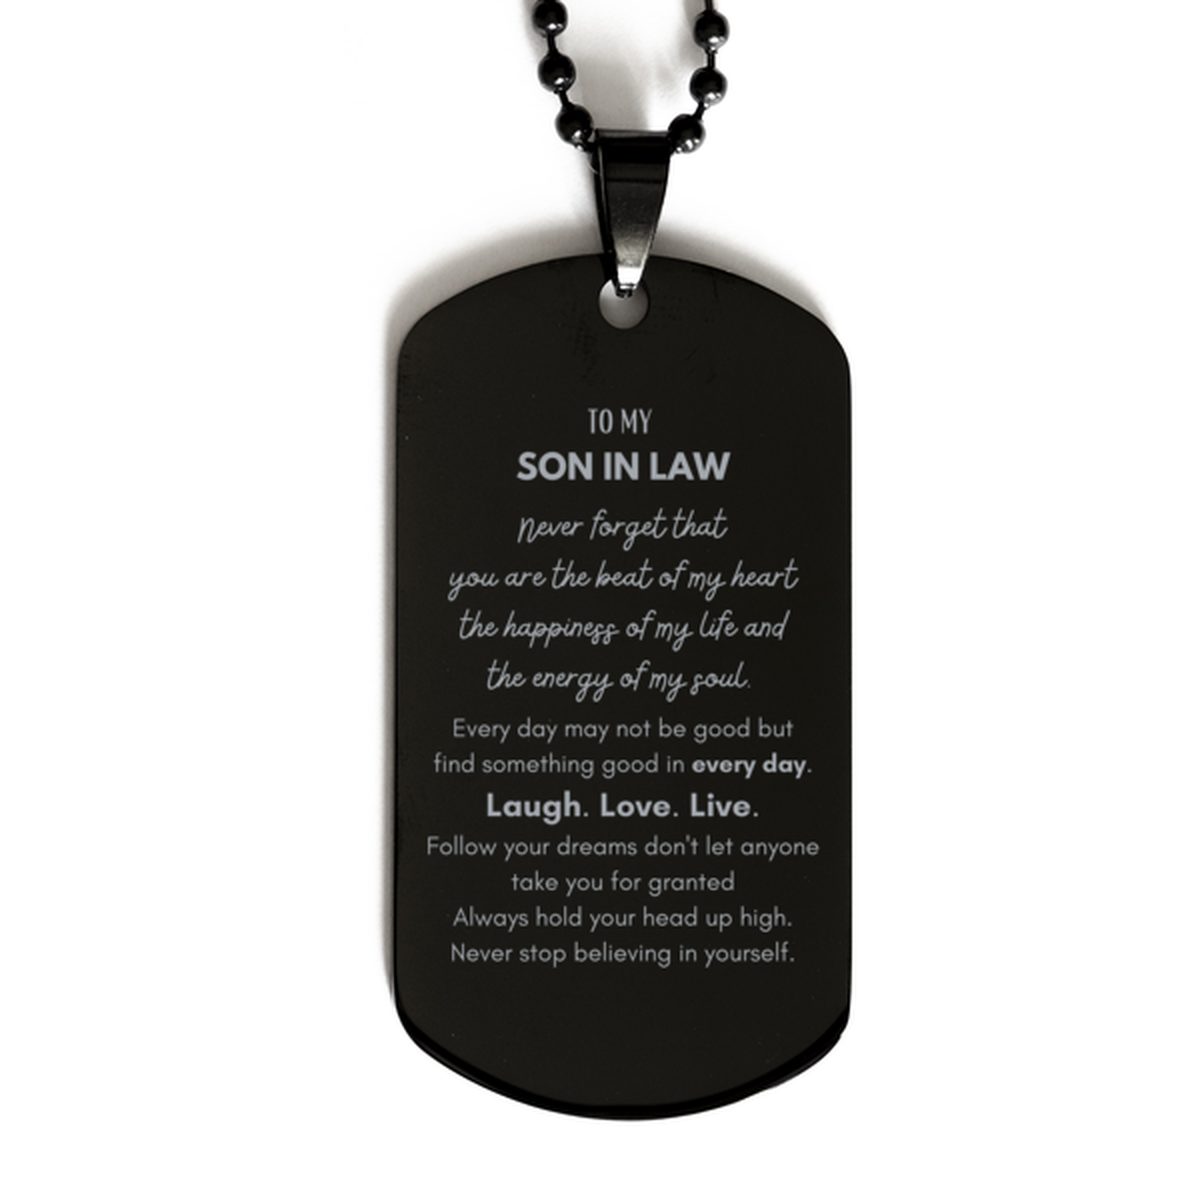 To My Son In Law Dogtag Gifts, Christmas Son In Law Black Dog Tag Present, Birthday Unique Motivational For Son In Law, To My Son In Law Never forget that you are the beat of my heart the happiness of my life and the energy of my soul